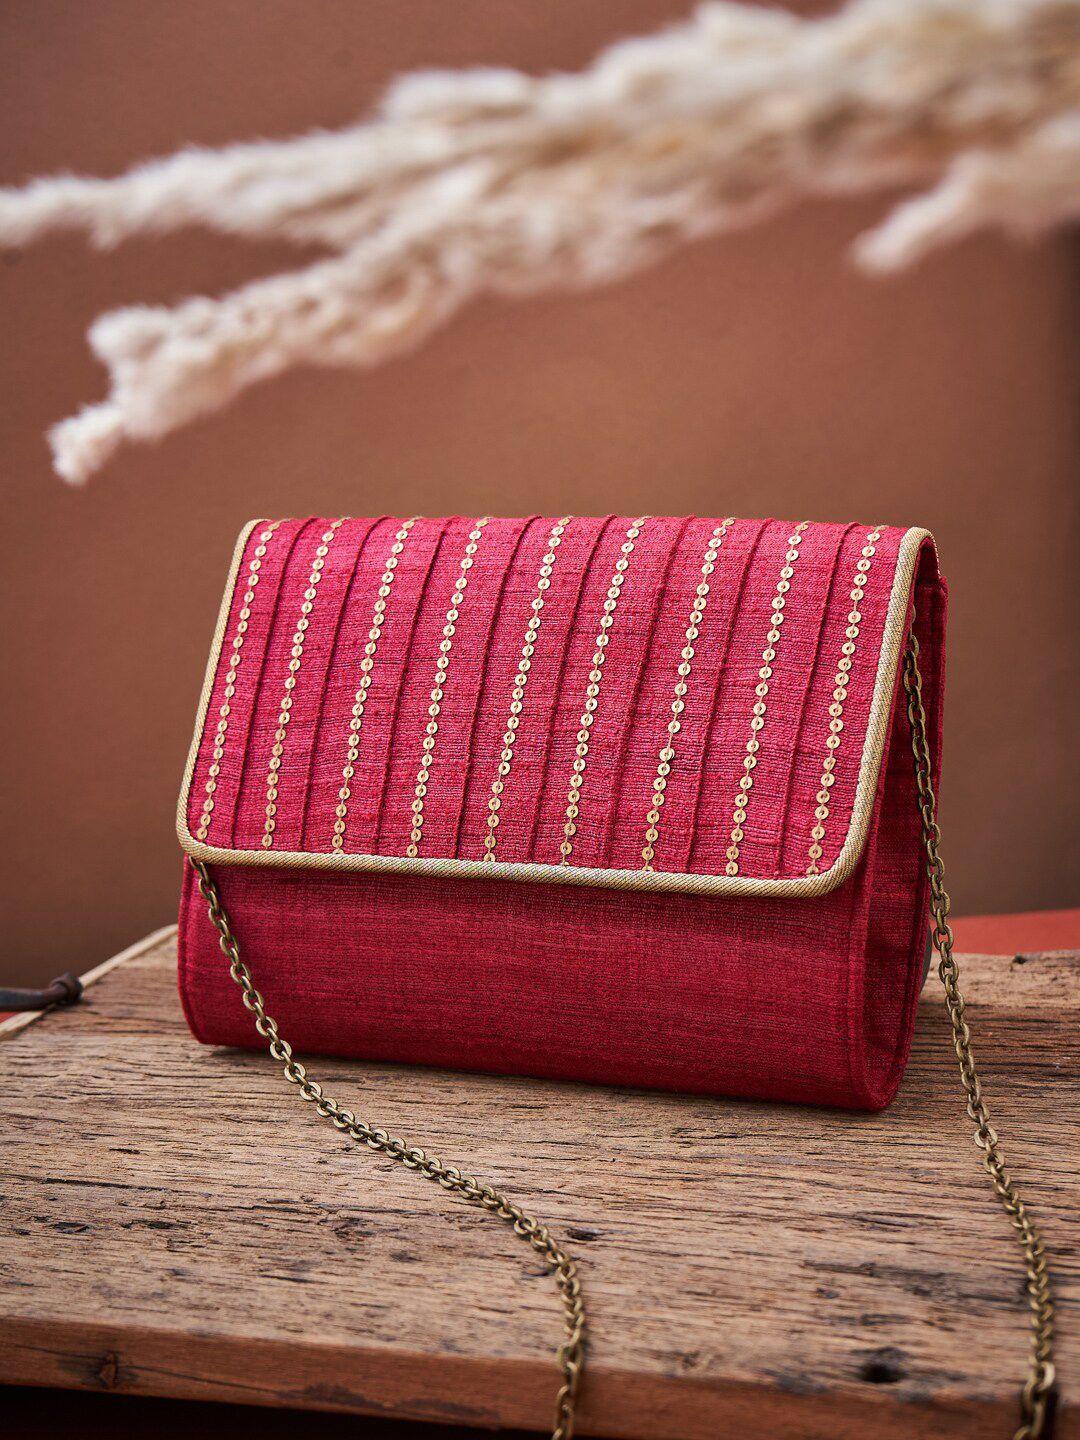 fabindia women red & gold-toned embellished clutch